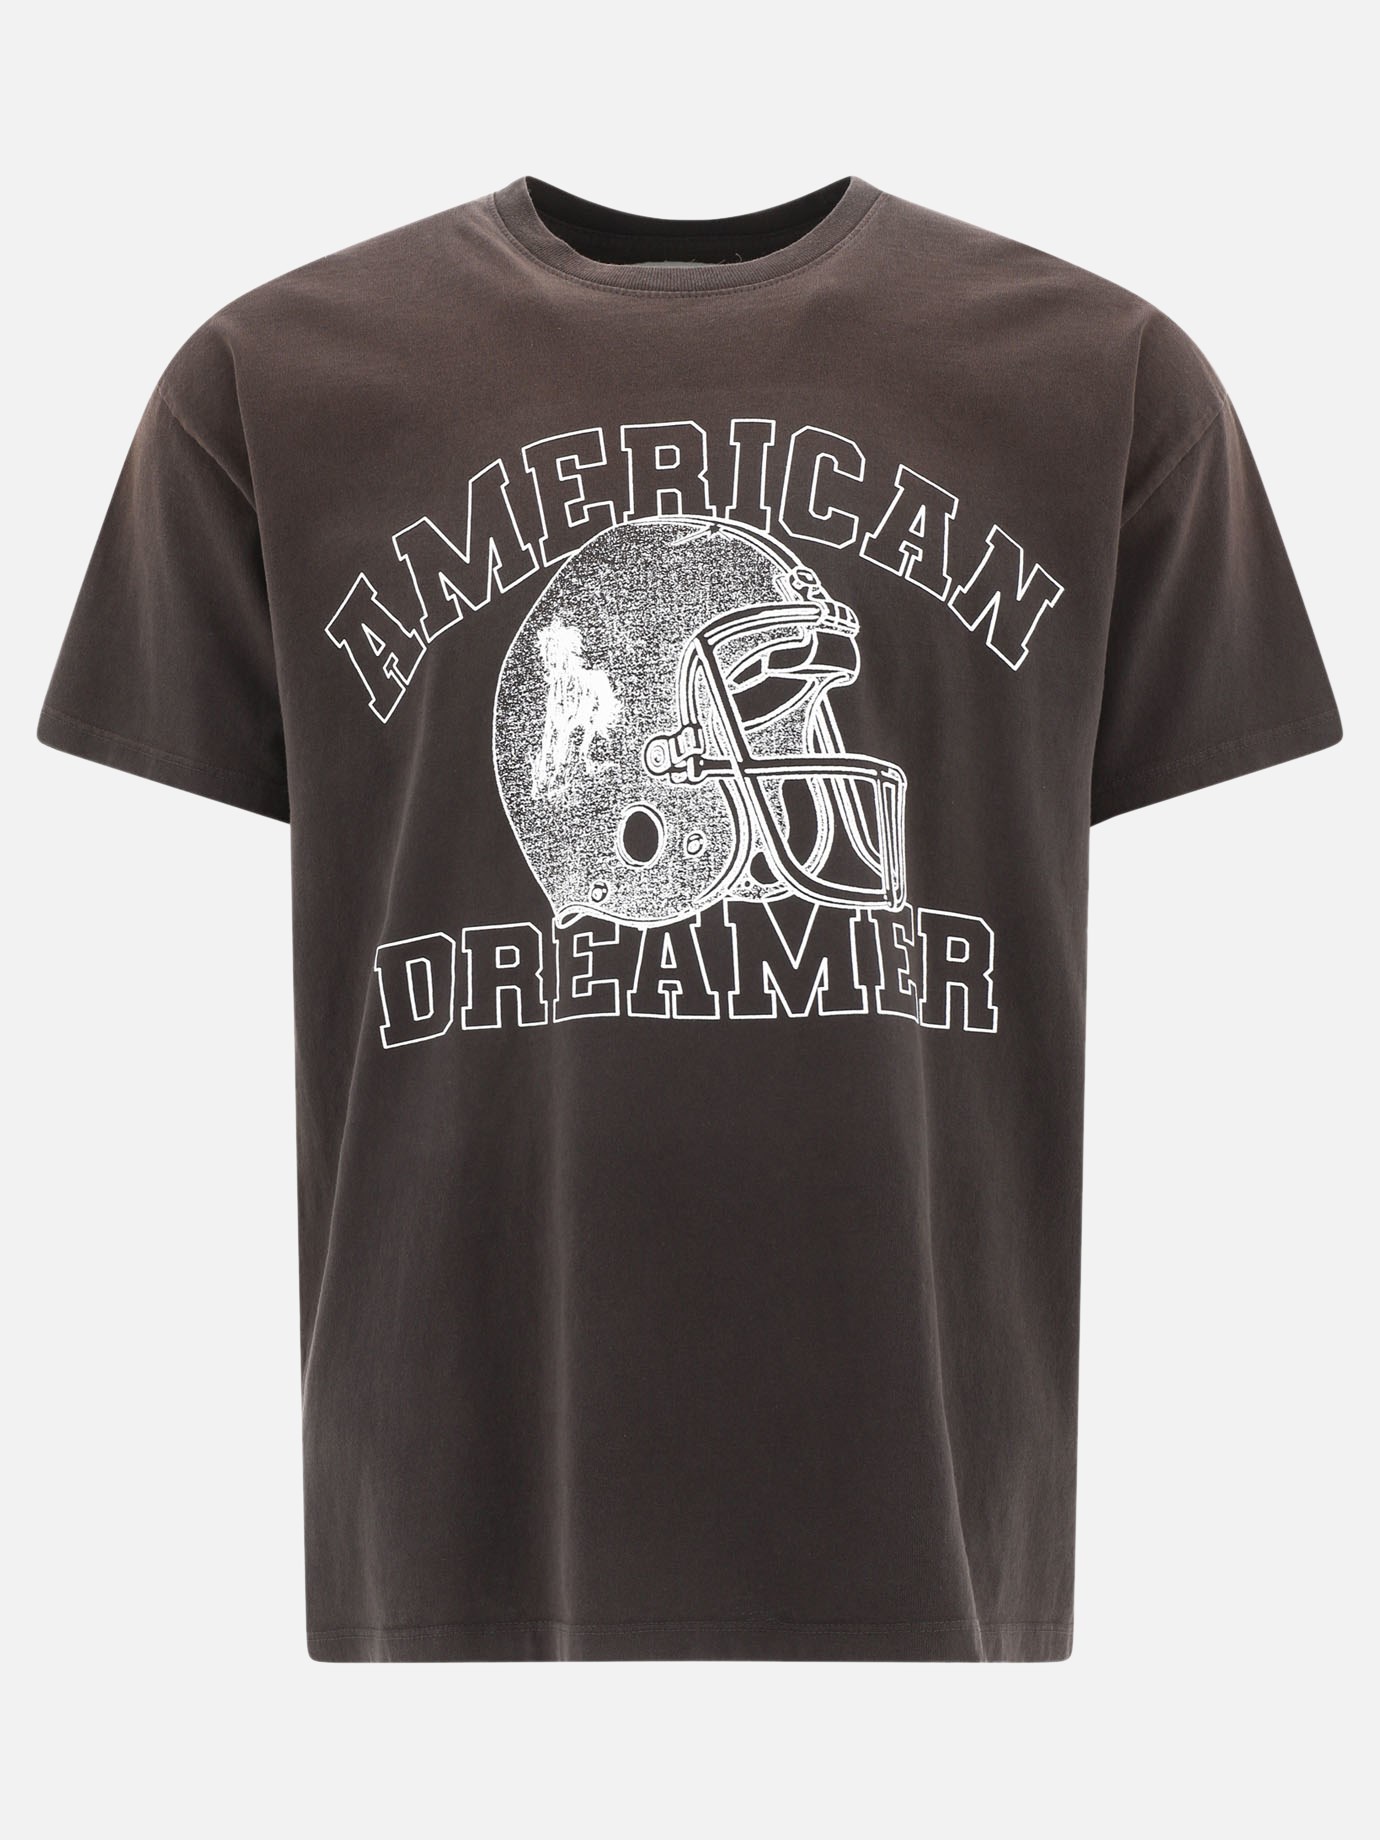  American Dreamer  t-shirtby One Of These Days - 3